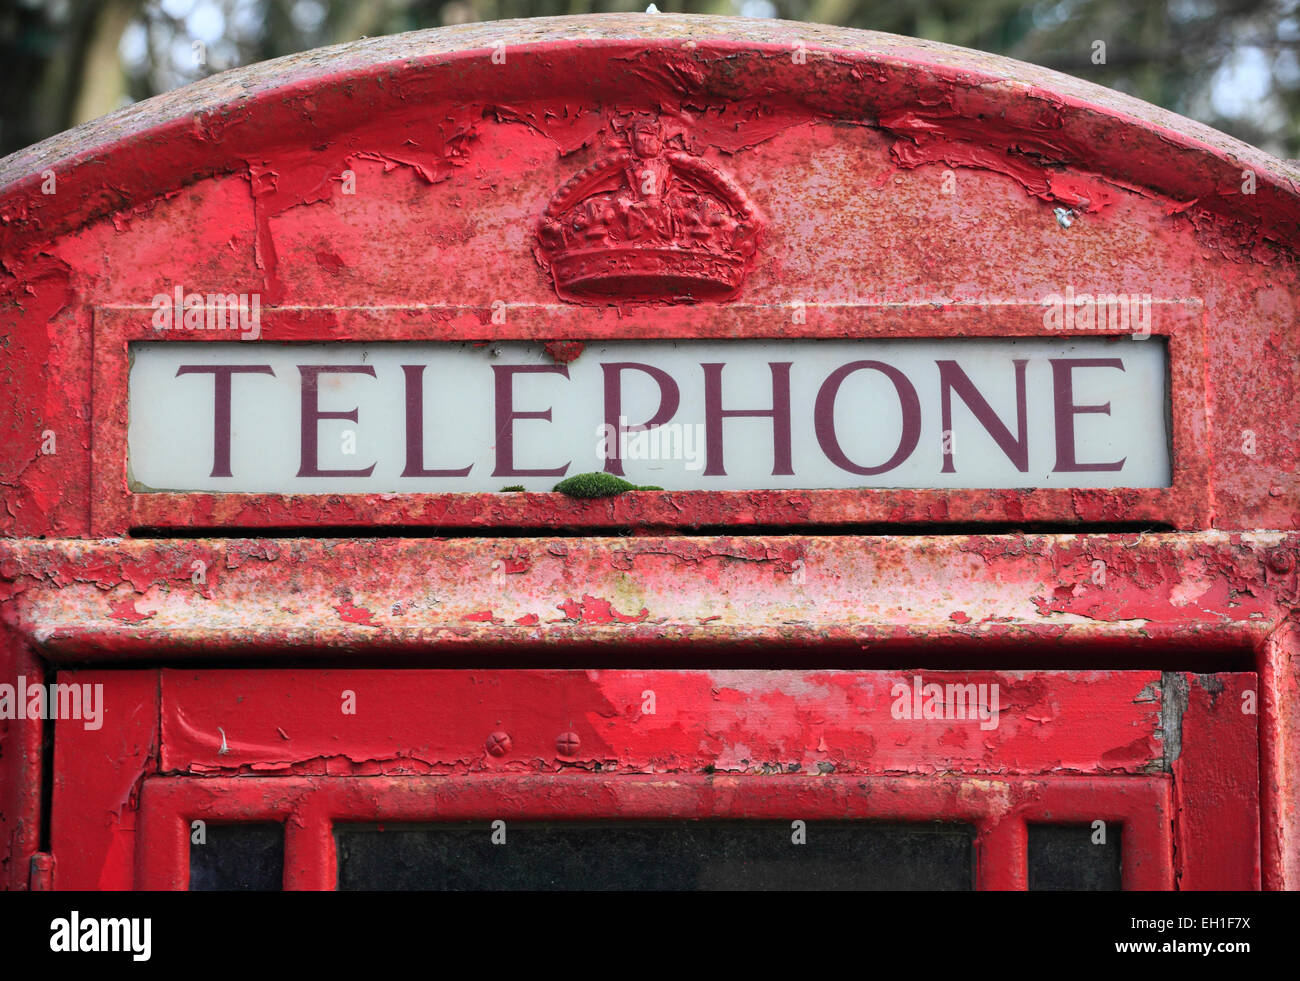 Traditional red telephone box in a rural Norfolk village. Stock Photo